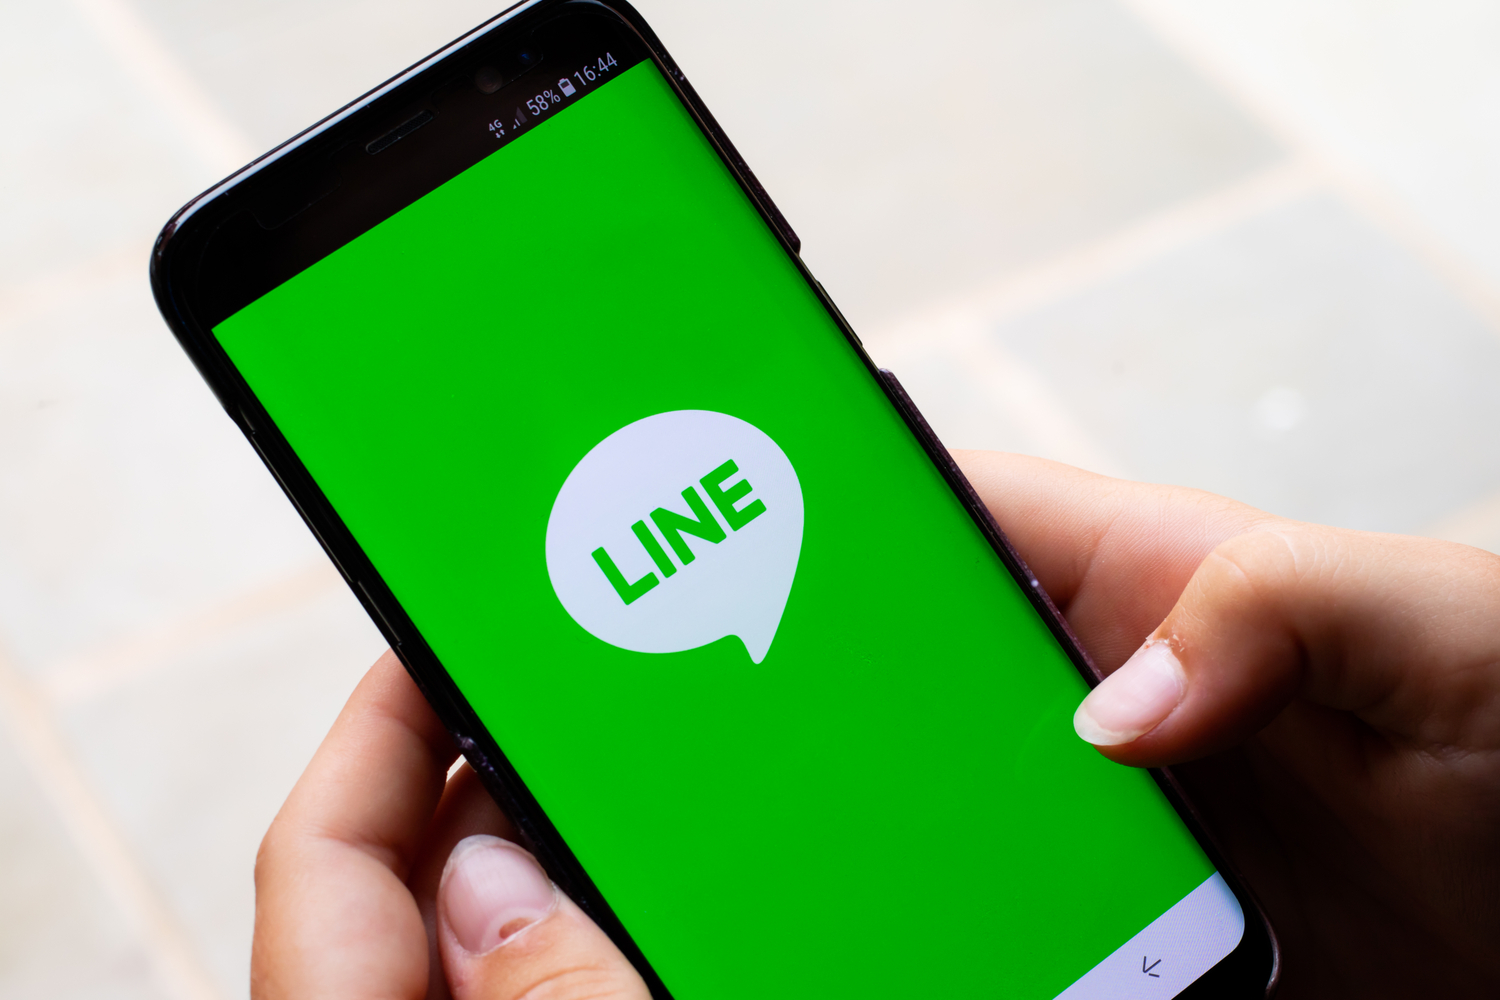 Japan’s Nomura Invests In Line’s LVC To Develop Blockchain Financial Services